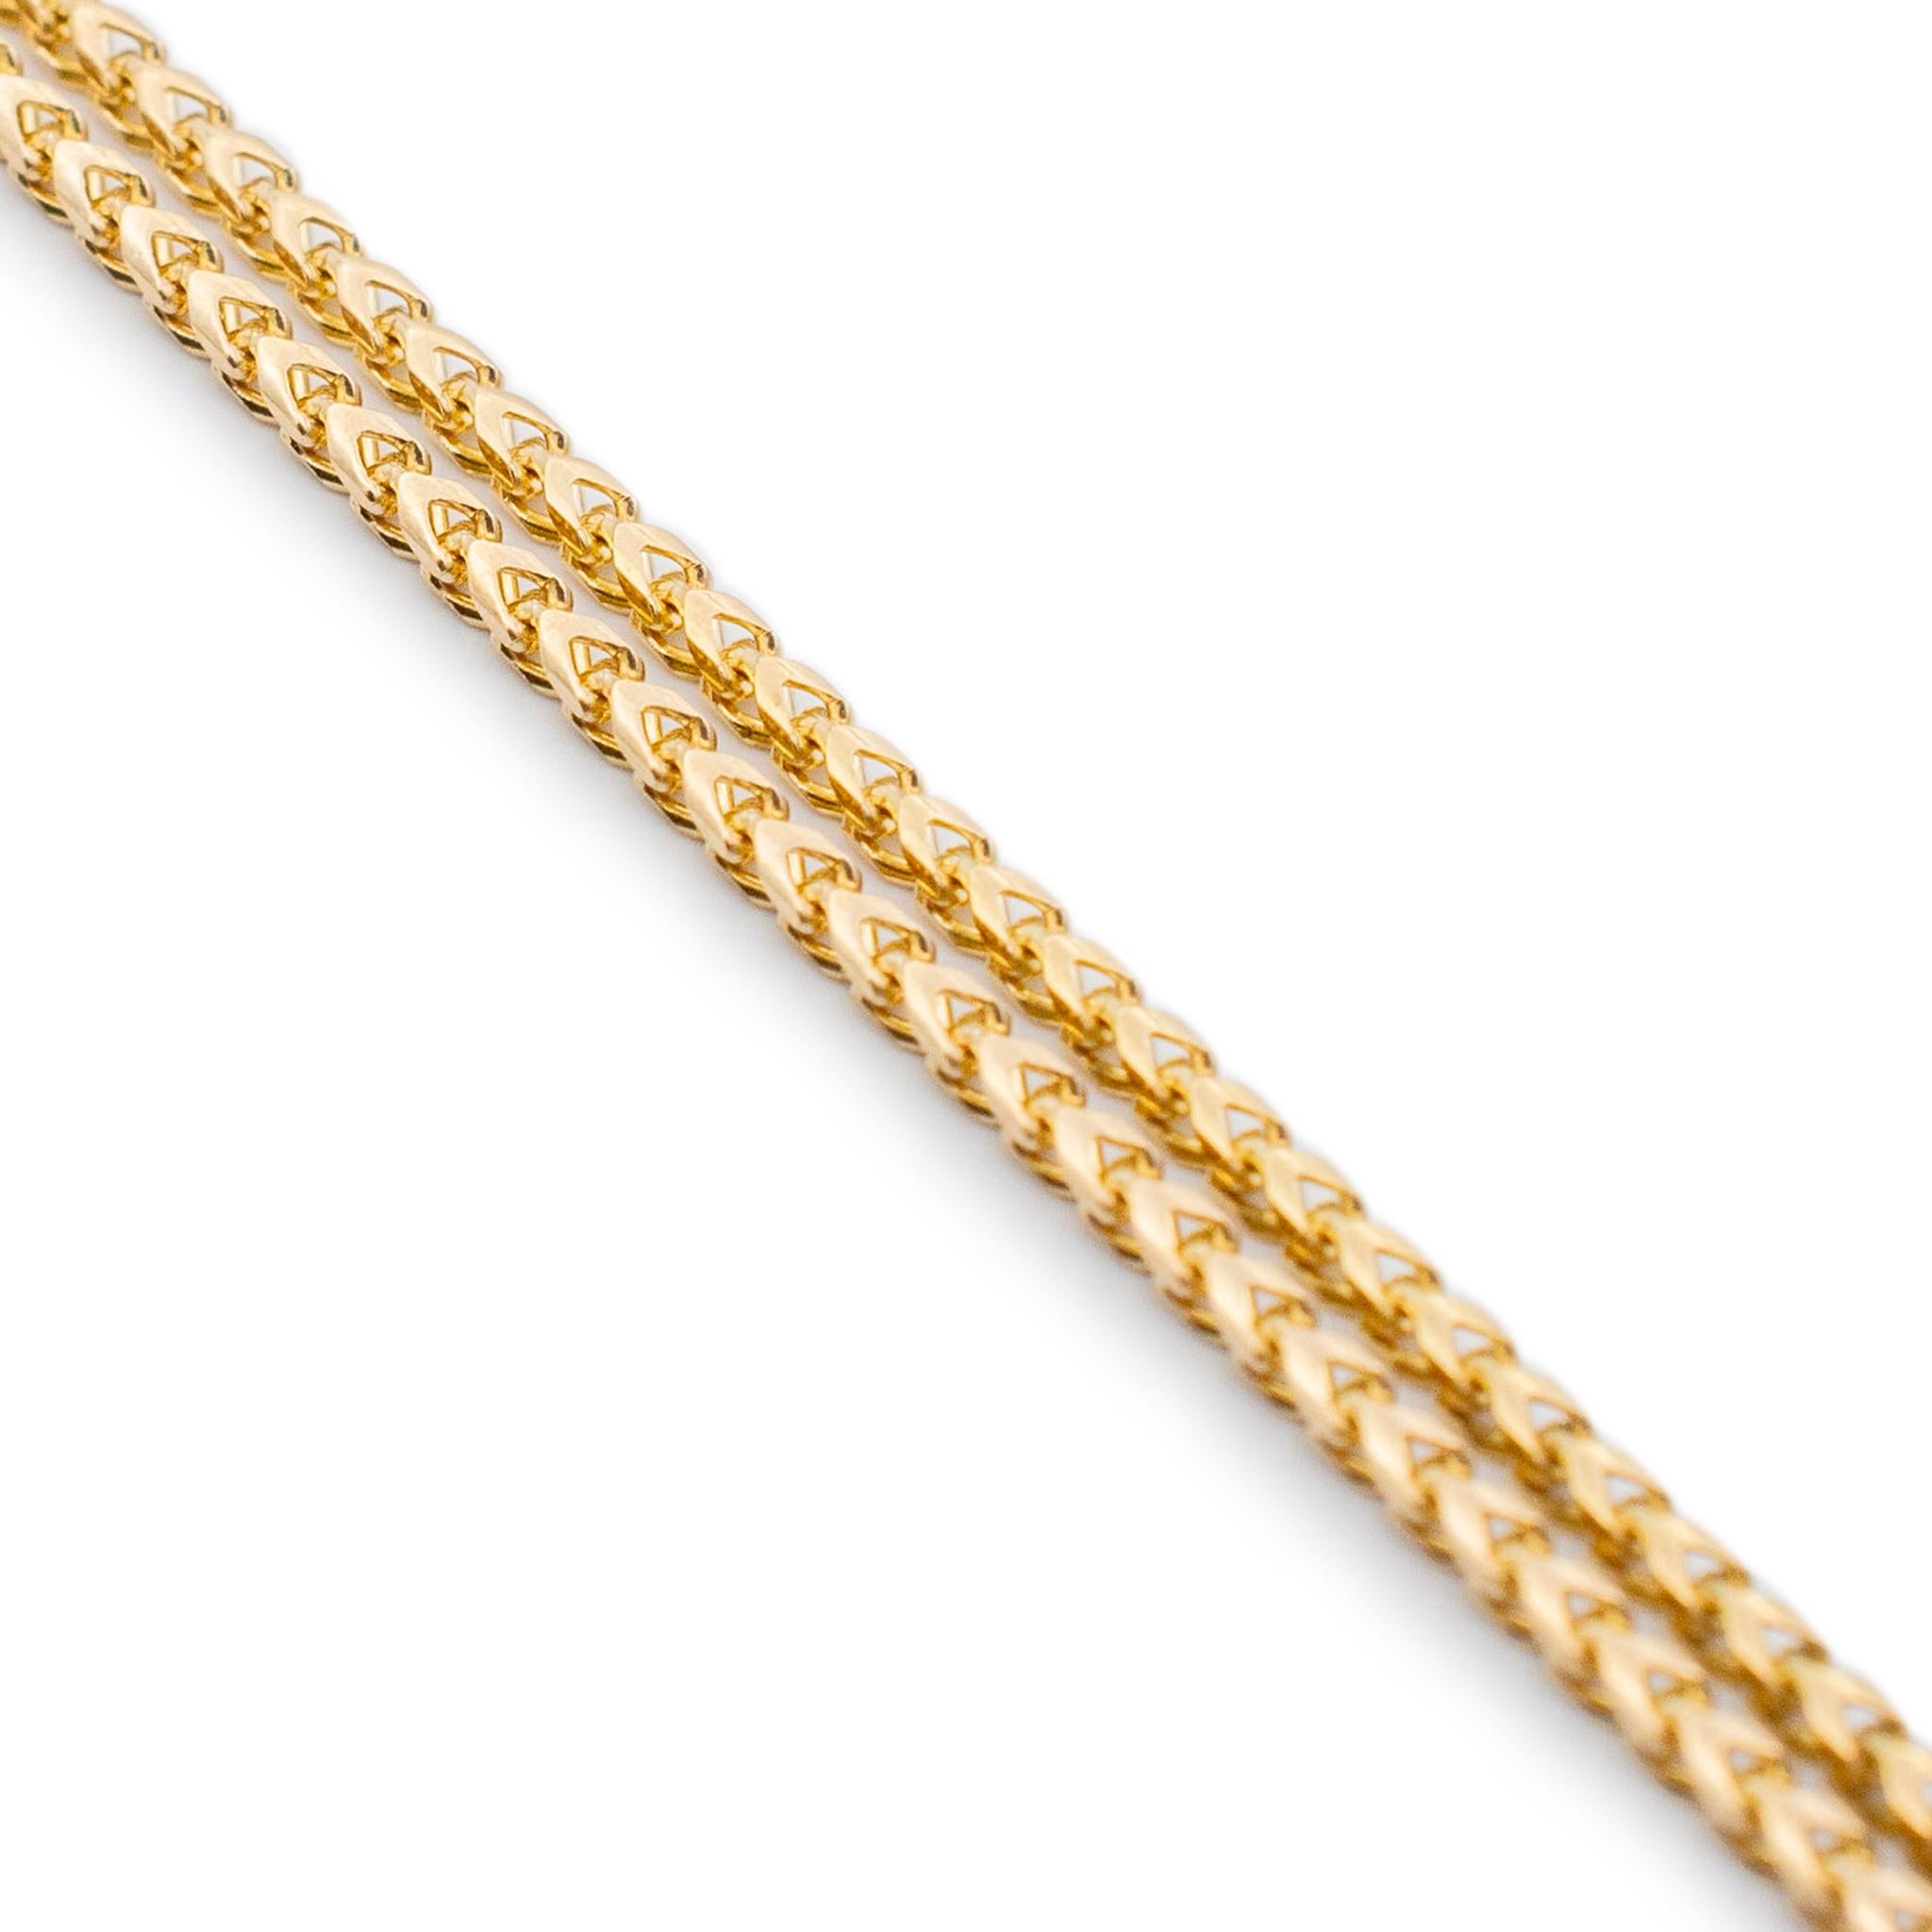 Brand: Jacoje

Gender: Ladie 's

Metal Type: 14K yellow gold

Length: 22.00 inches

Width: 1.05 mm

Weight: 3.80 grams

14K yellow gold foxtail link chain. The chain measures approximately 22.00 inches in length by 1.05 mm in width and weighs a